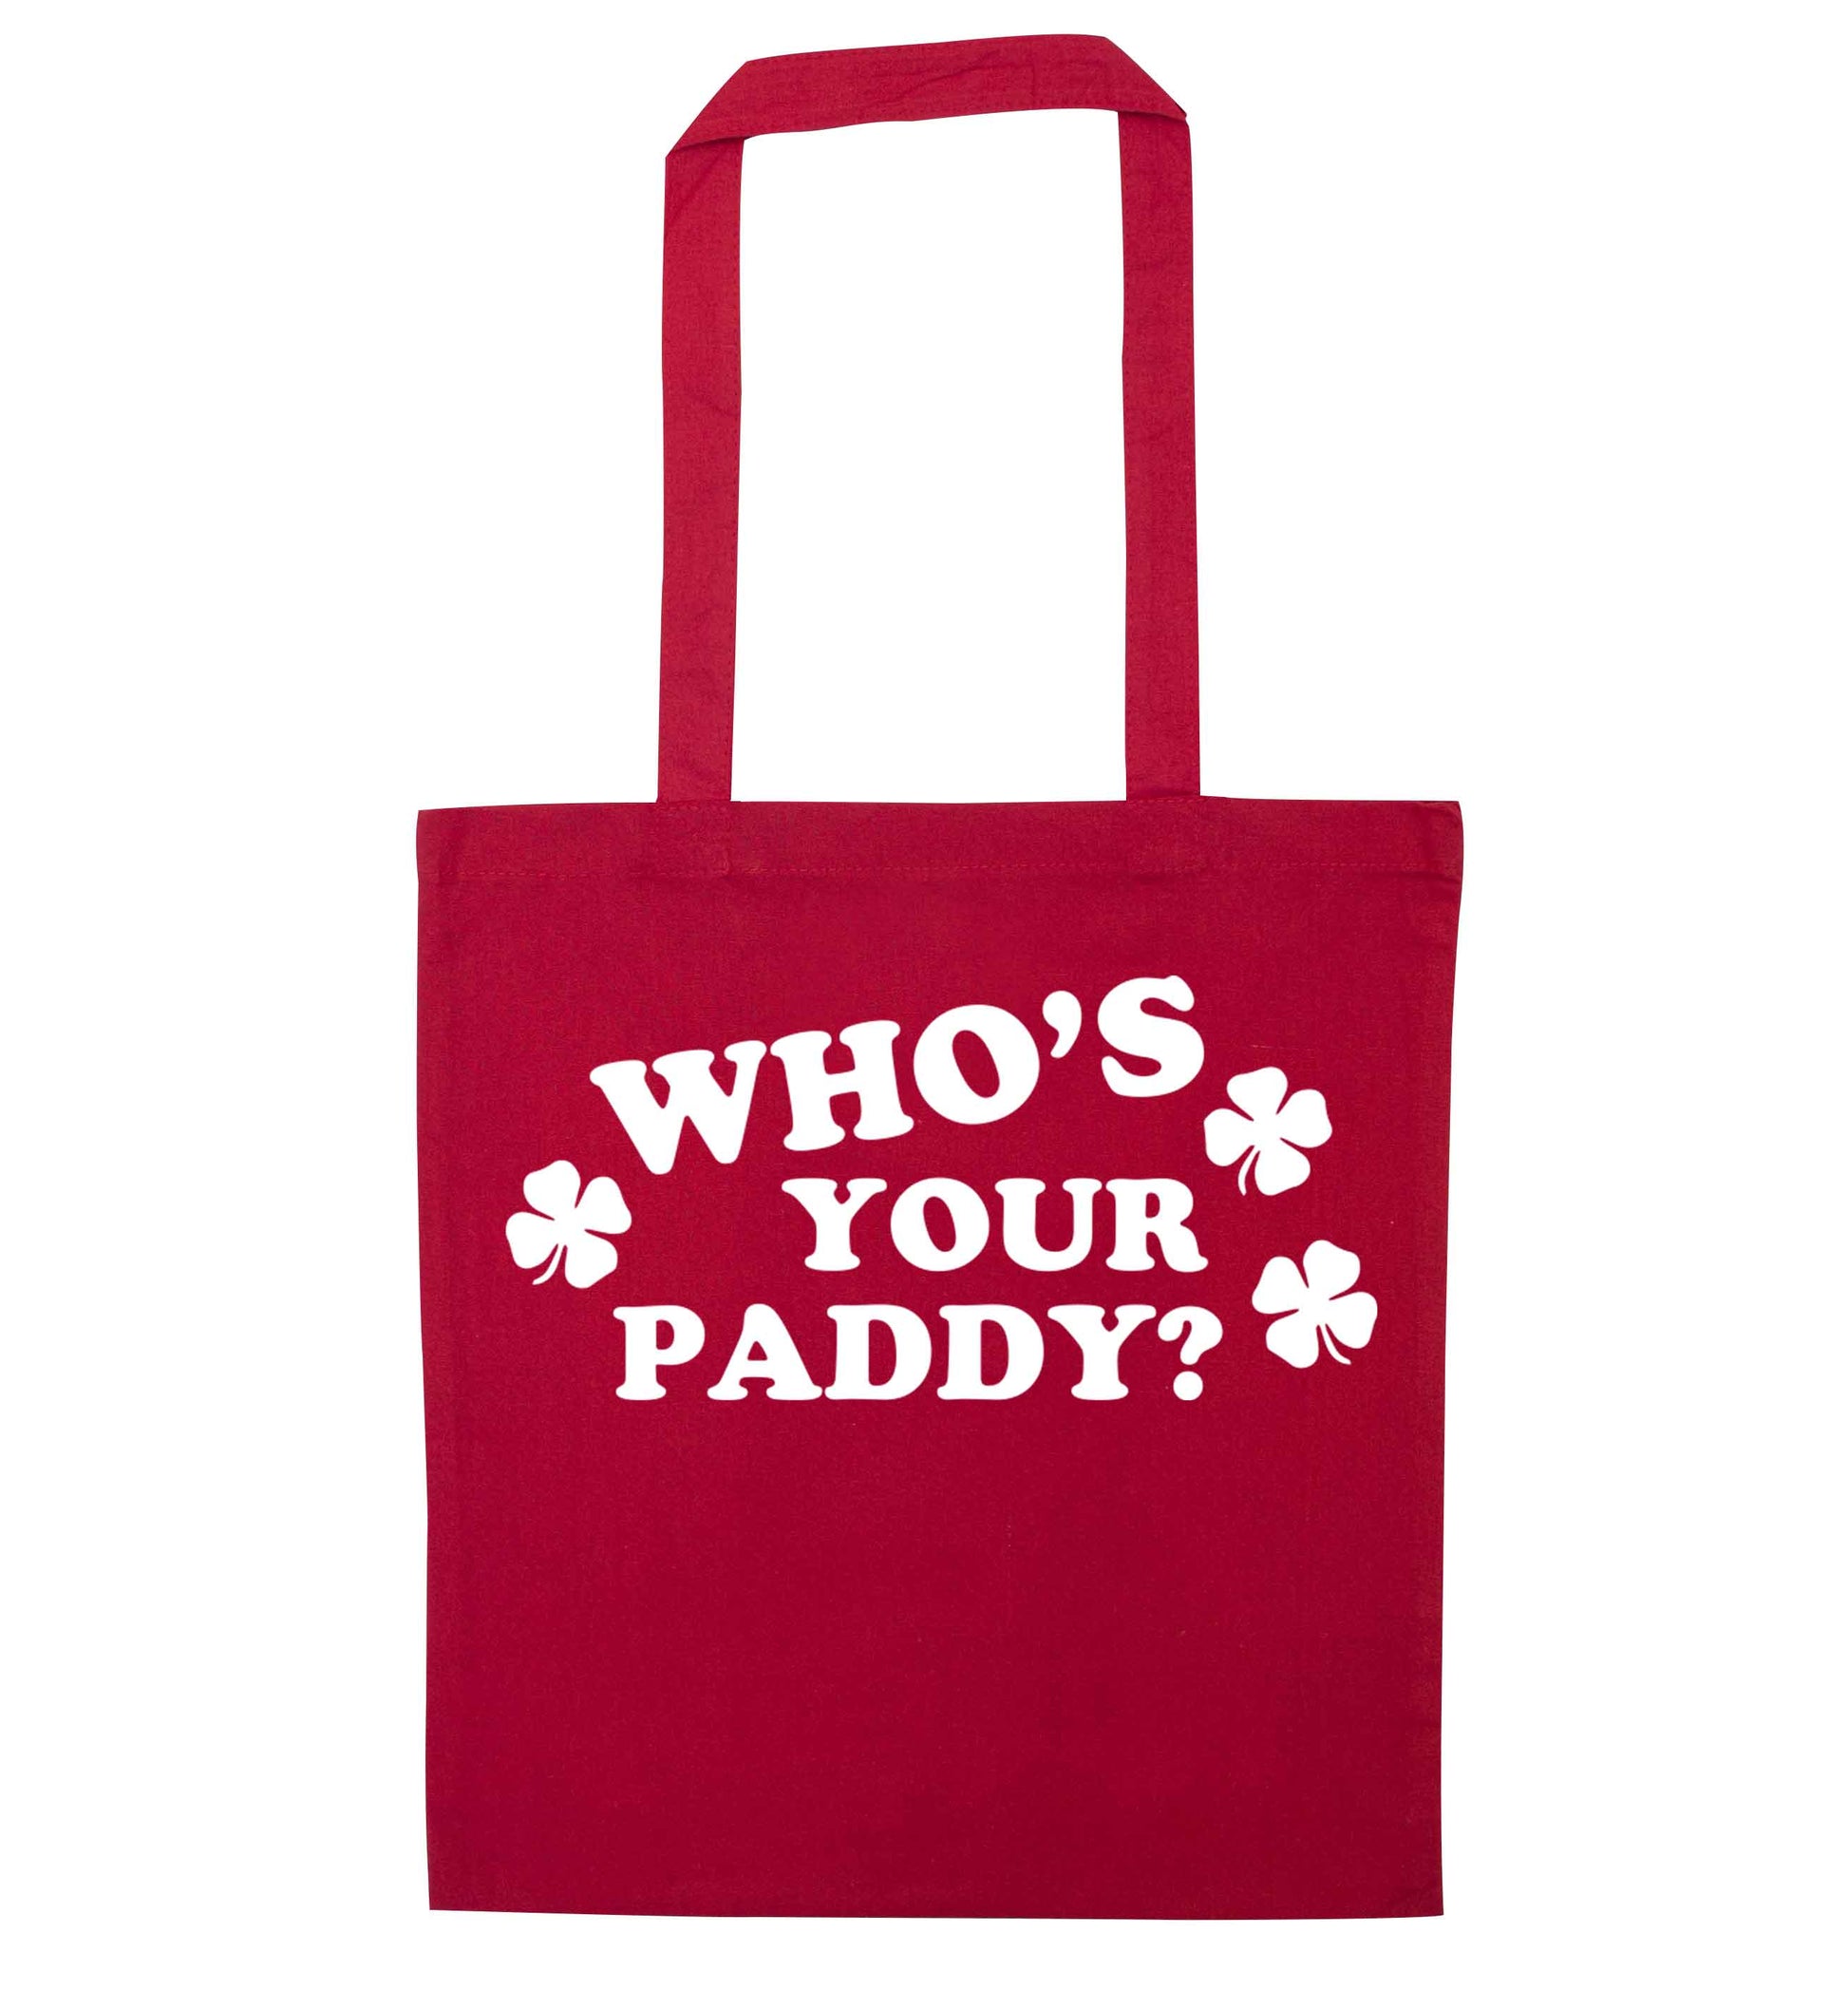 Who's your paddy? red tote bag